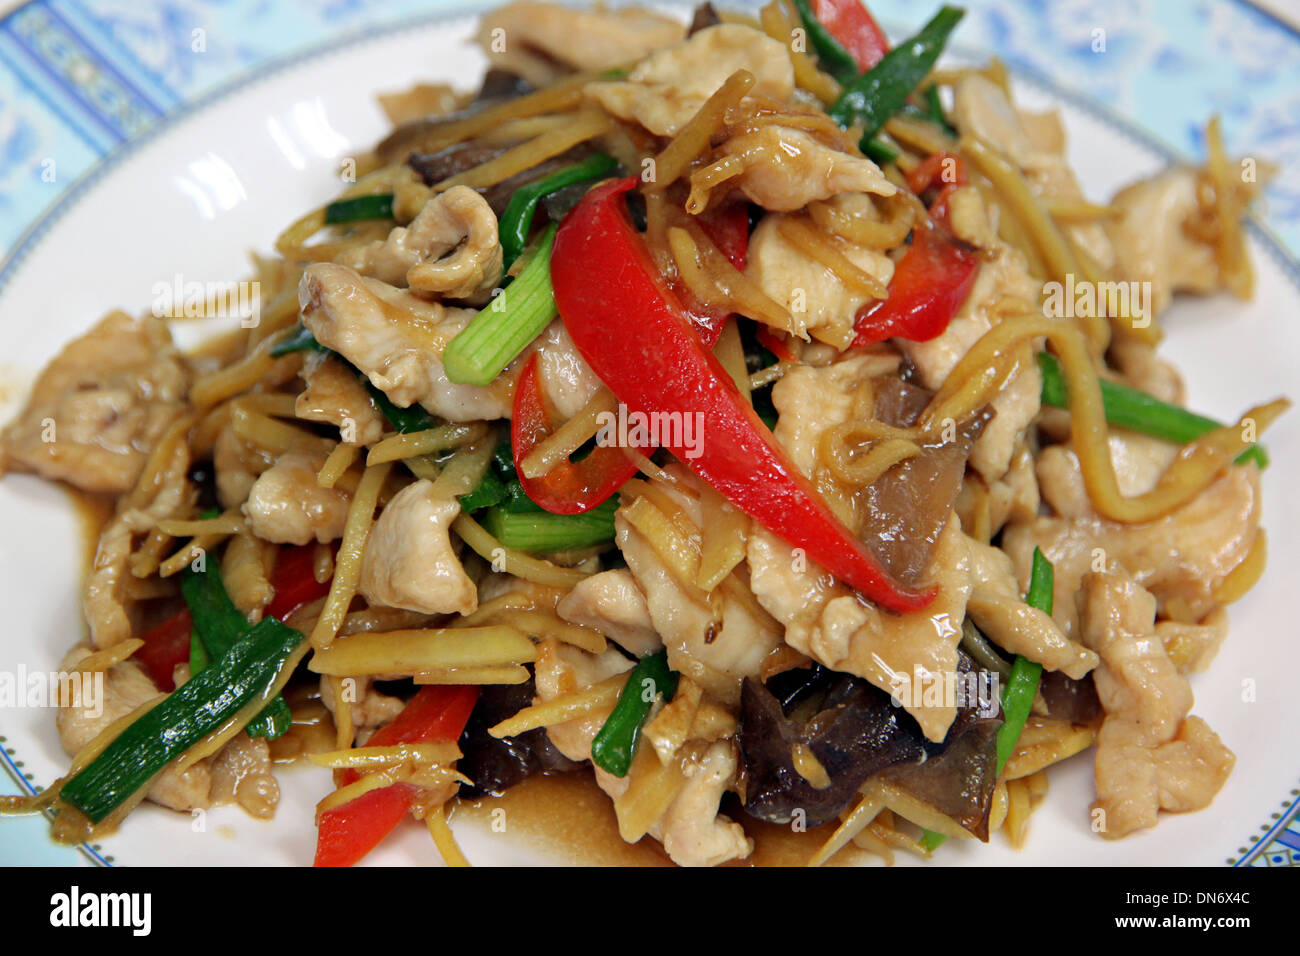 The Picture Ginger Chicken Stir Fry in dish. Stock Photo